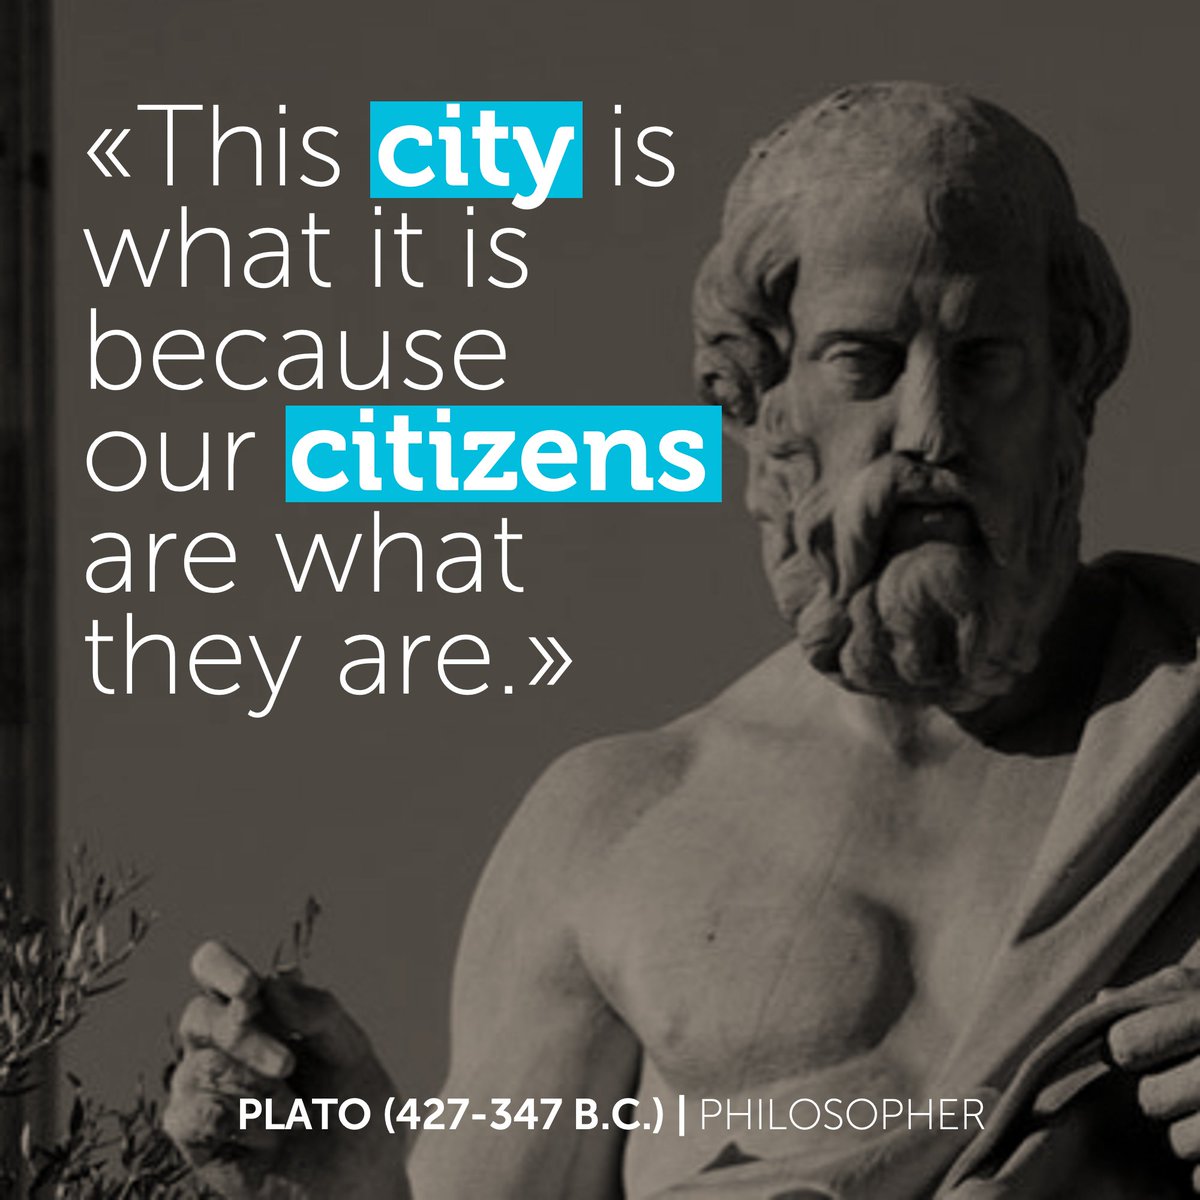 🤔 Do you agree with Plato's reflection on the #city and its identity?

💡 Find out more #CityQuotes curated by our team in our #Instagram account! 👉🏽 instagram.com/antevertibcn